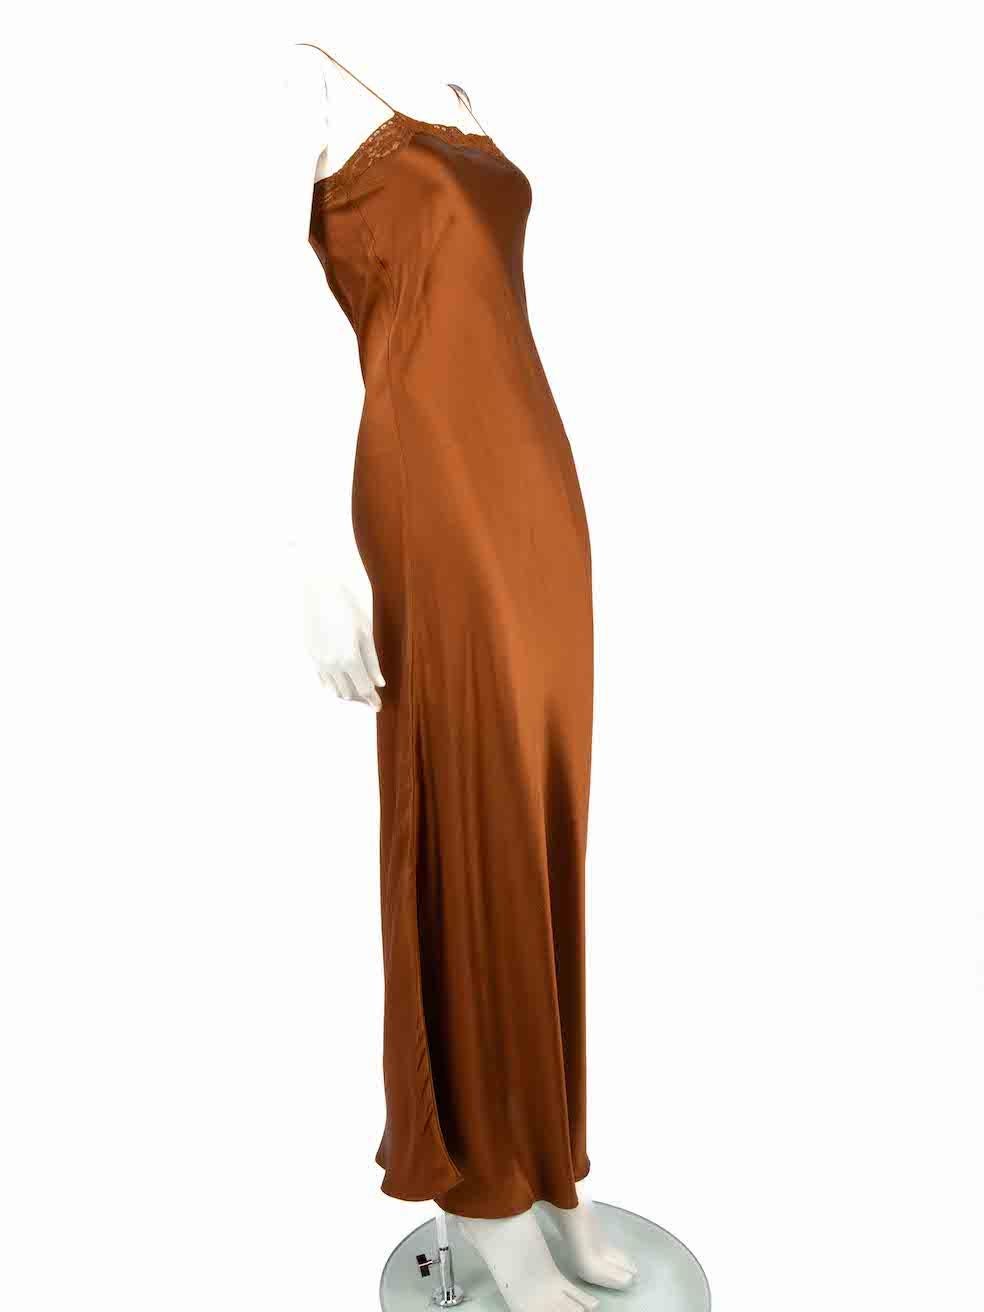 CONDITION is Never worn, with tags. No visible wear to dress is evident on this new Mes Demoiselles designer resale item.
 
 
 
 Details
 
 
 Brown
 
 Silk
 
 Slip dress
 
 Maxi
 
 Sleeveless
 
 Adjustable shoulder straps
 
 Lace trim
 
 Square